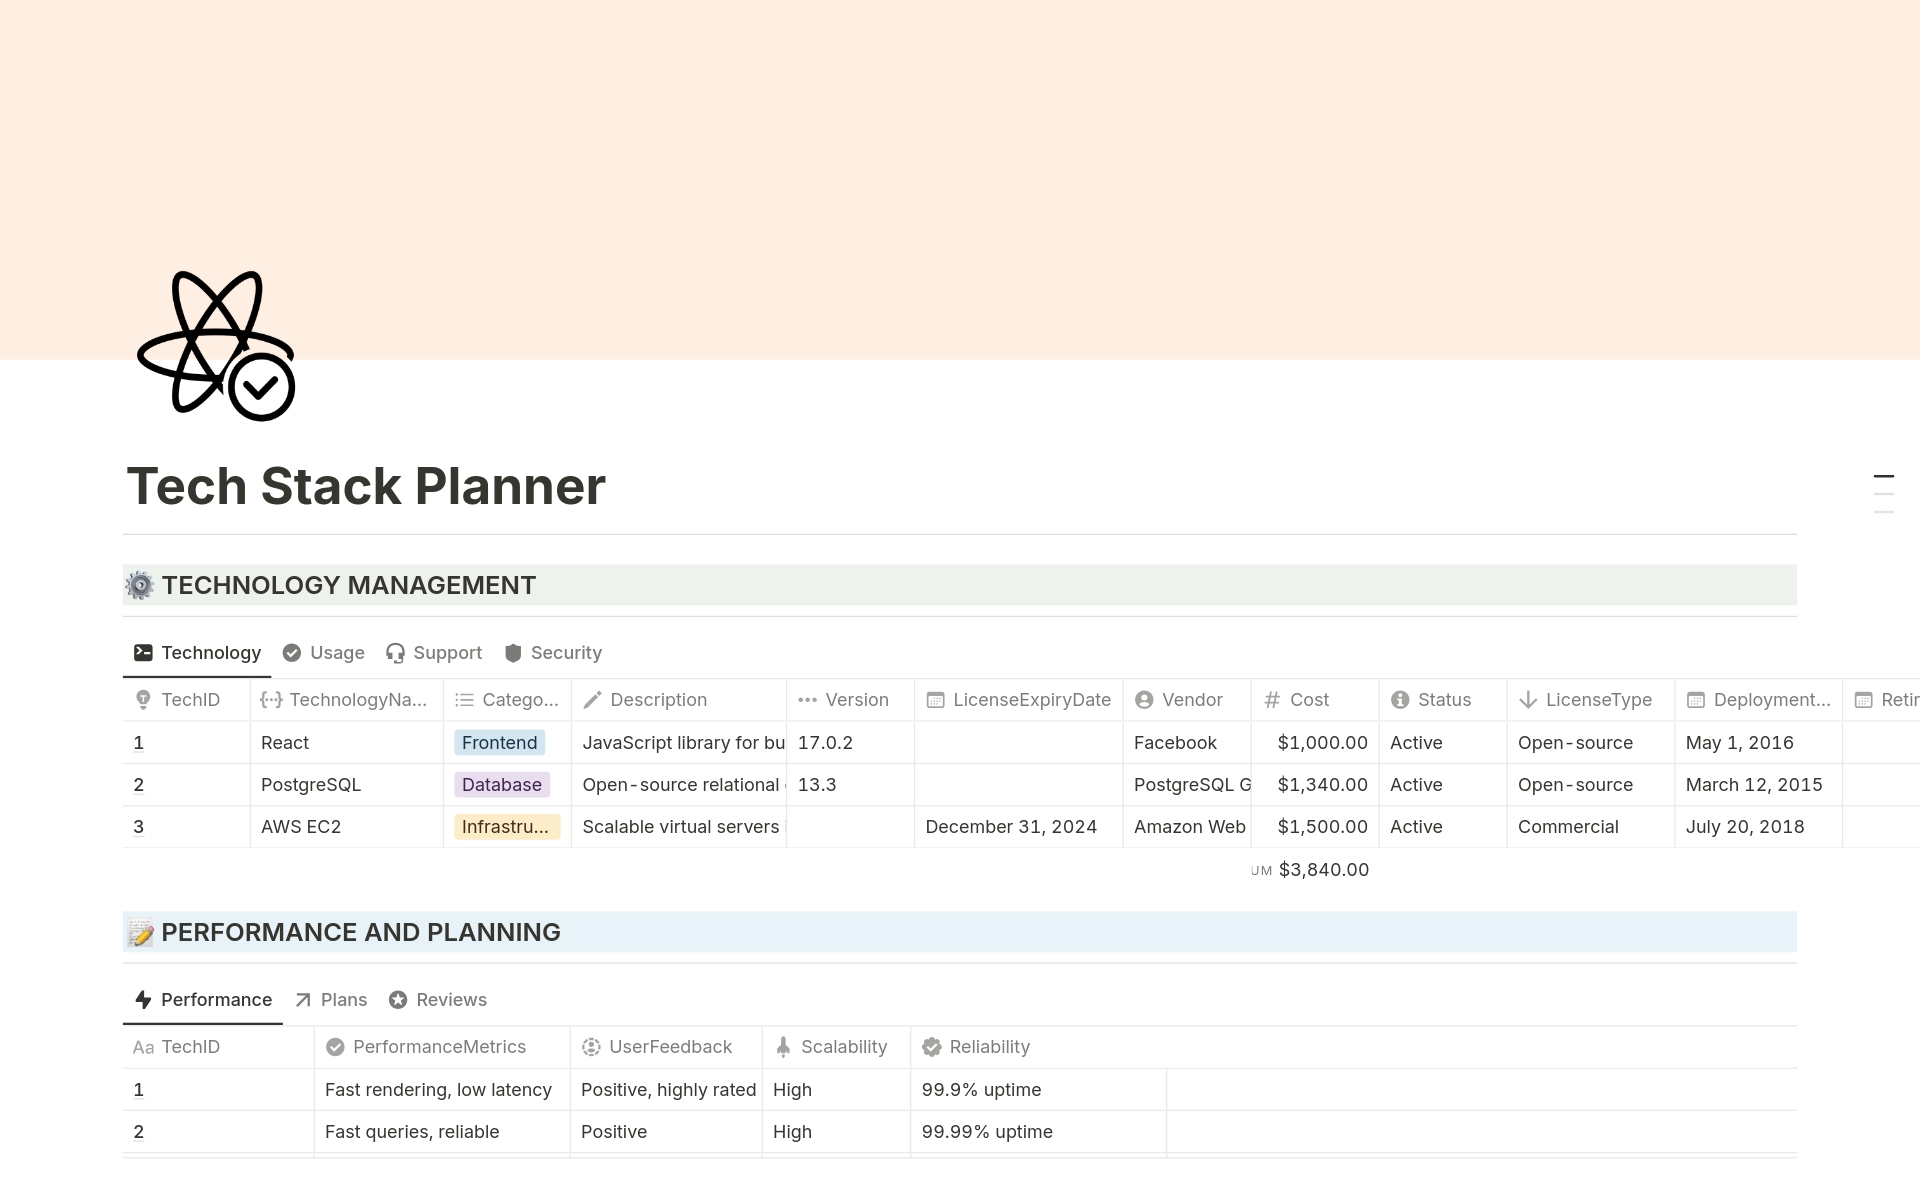 Ideal for those who are looking to manage the tech of their business, this tracker helps you keep track of tech needs and its details such as technology basics, tech usage, tech support, performance and much more.